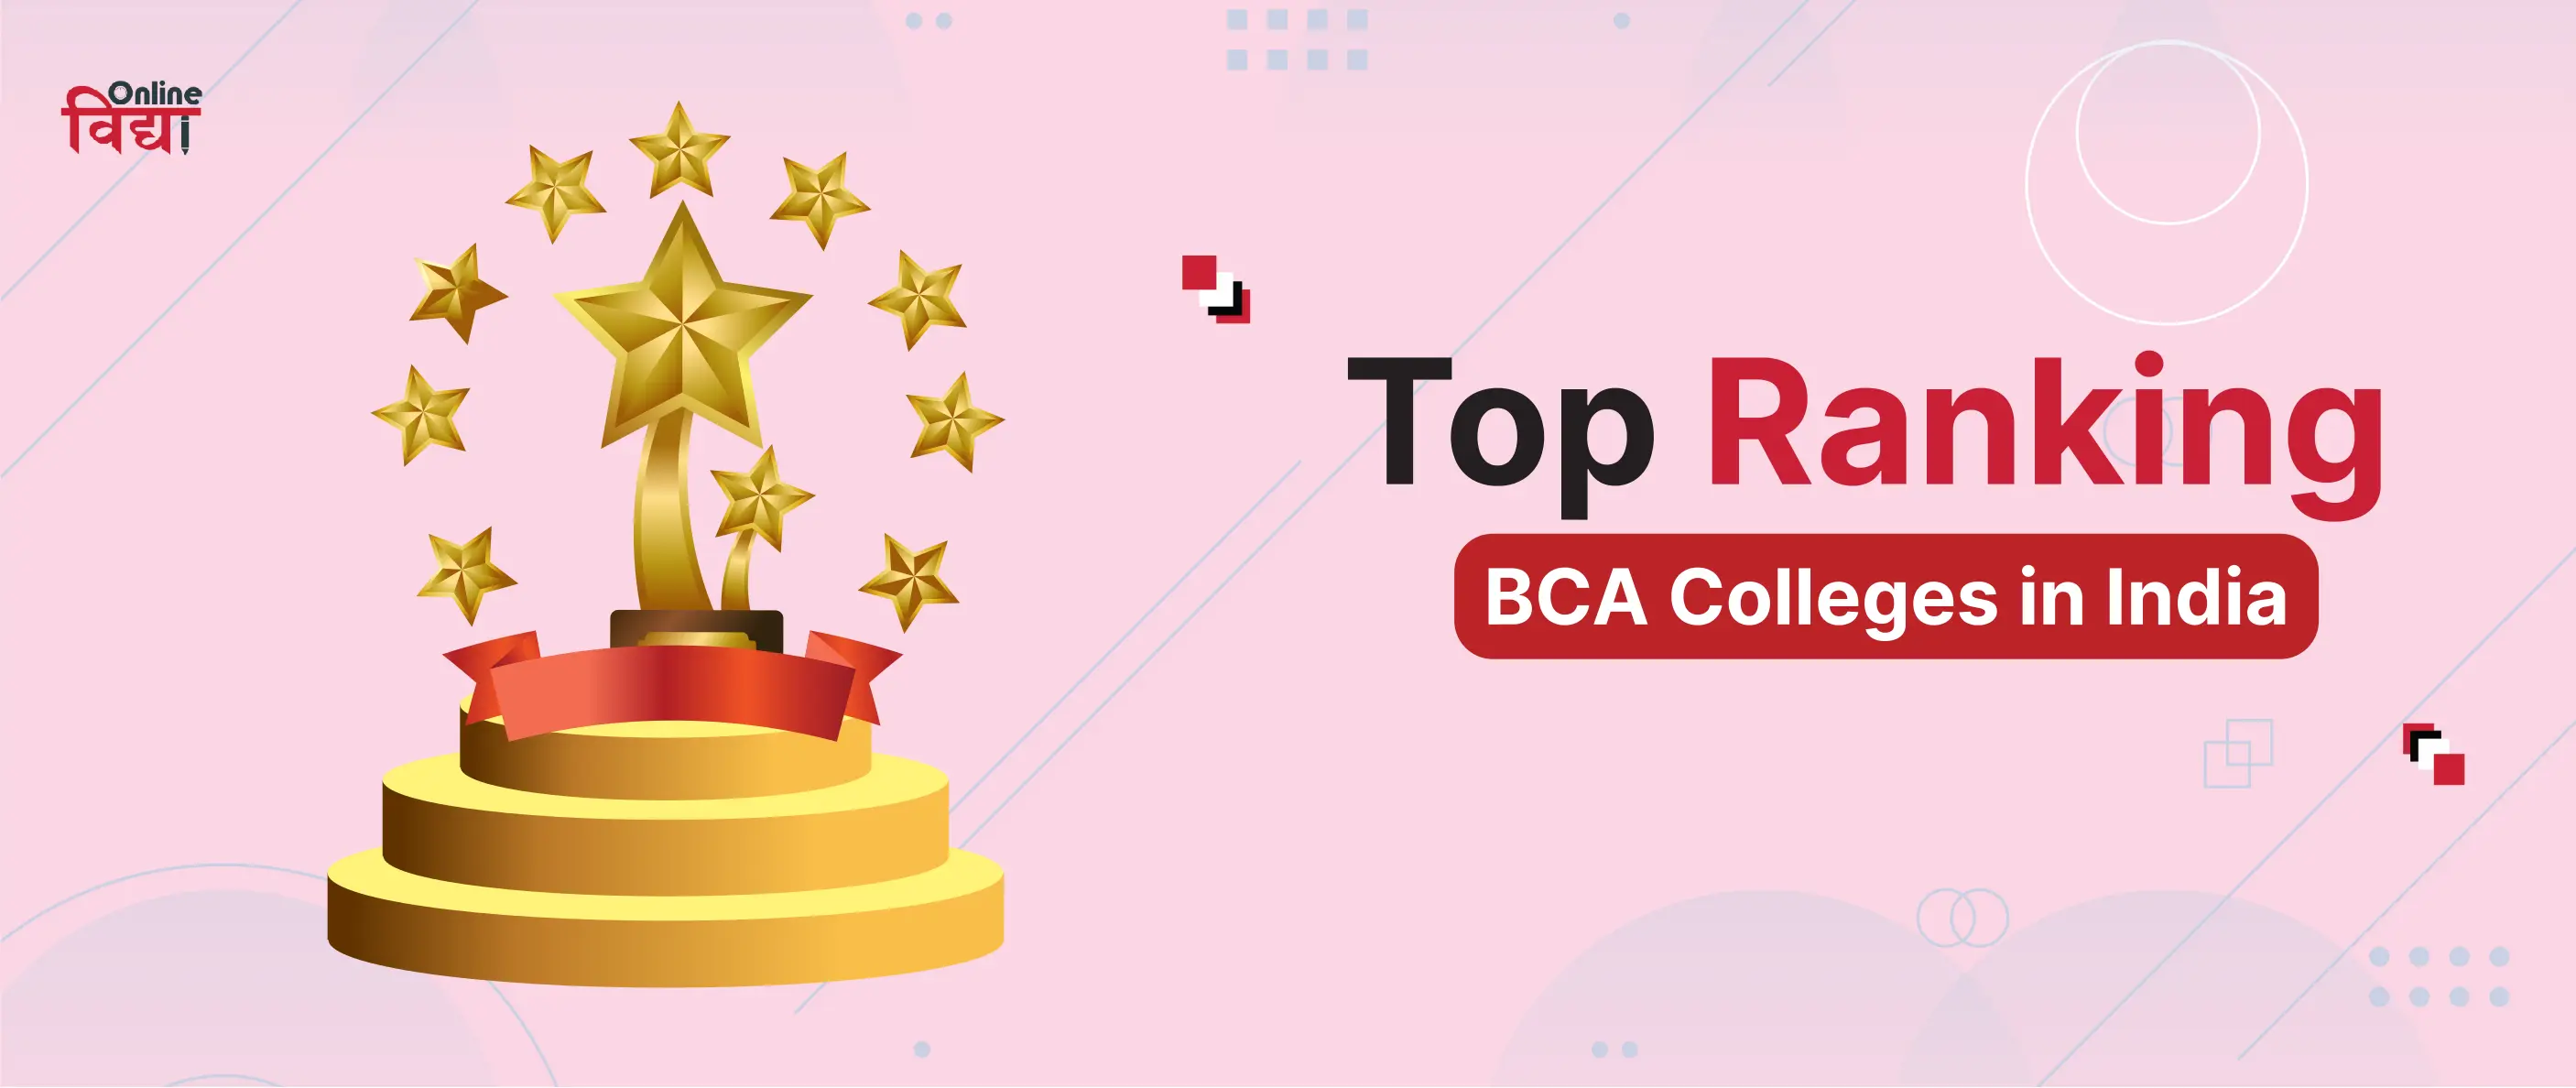 Top Ranking BCA Colleges in India